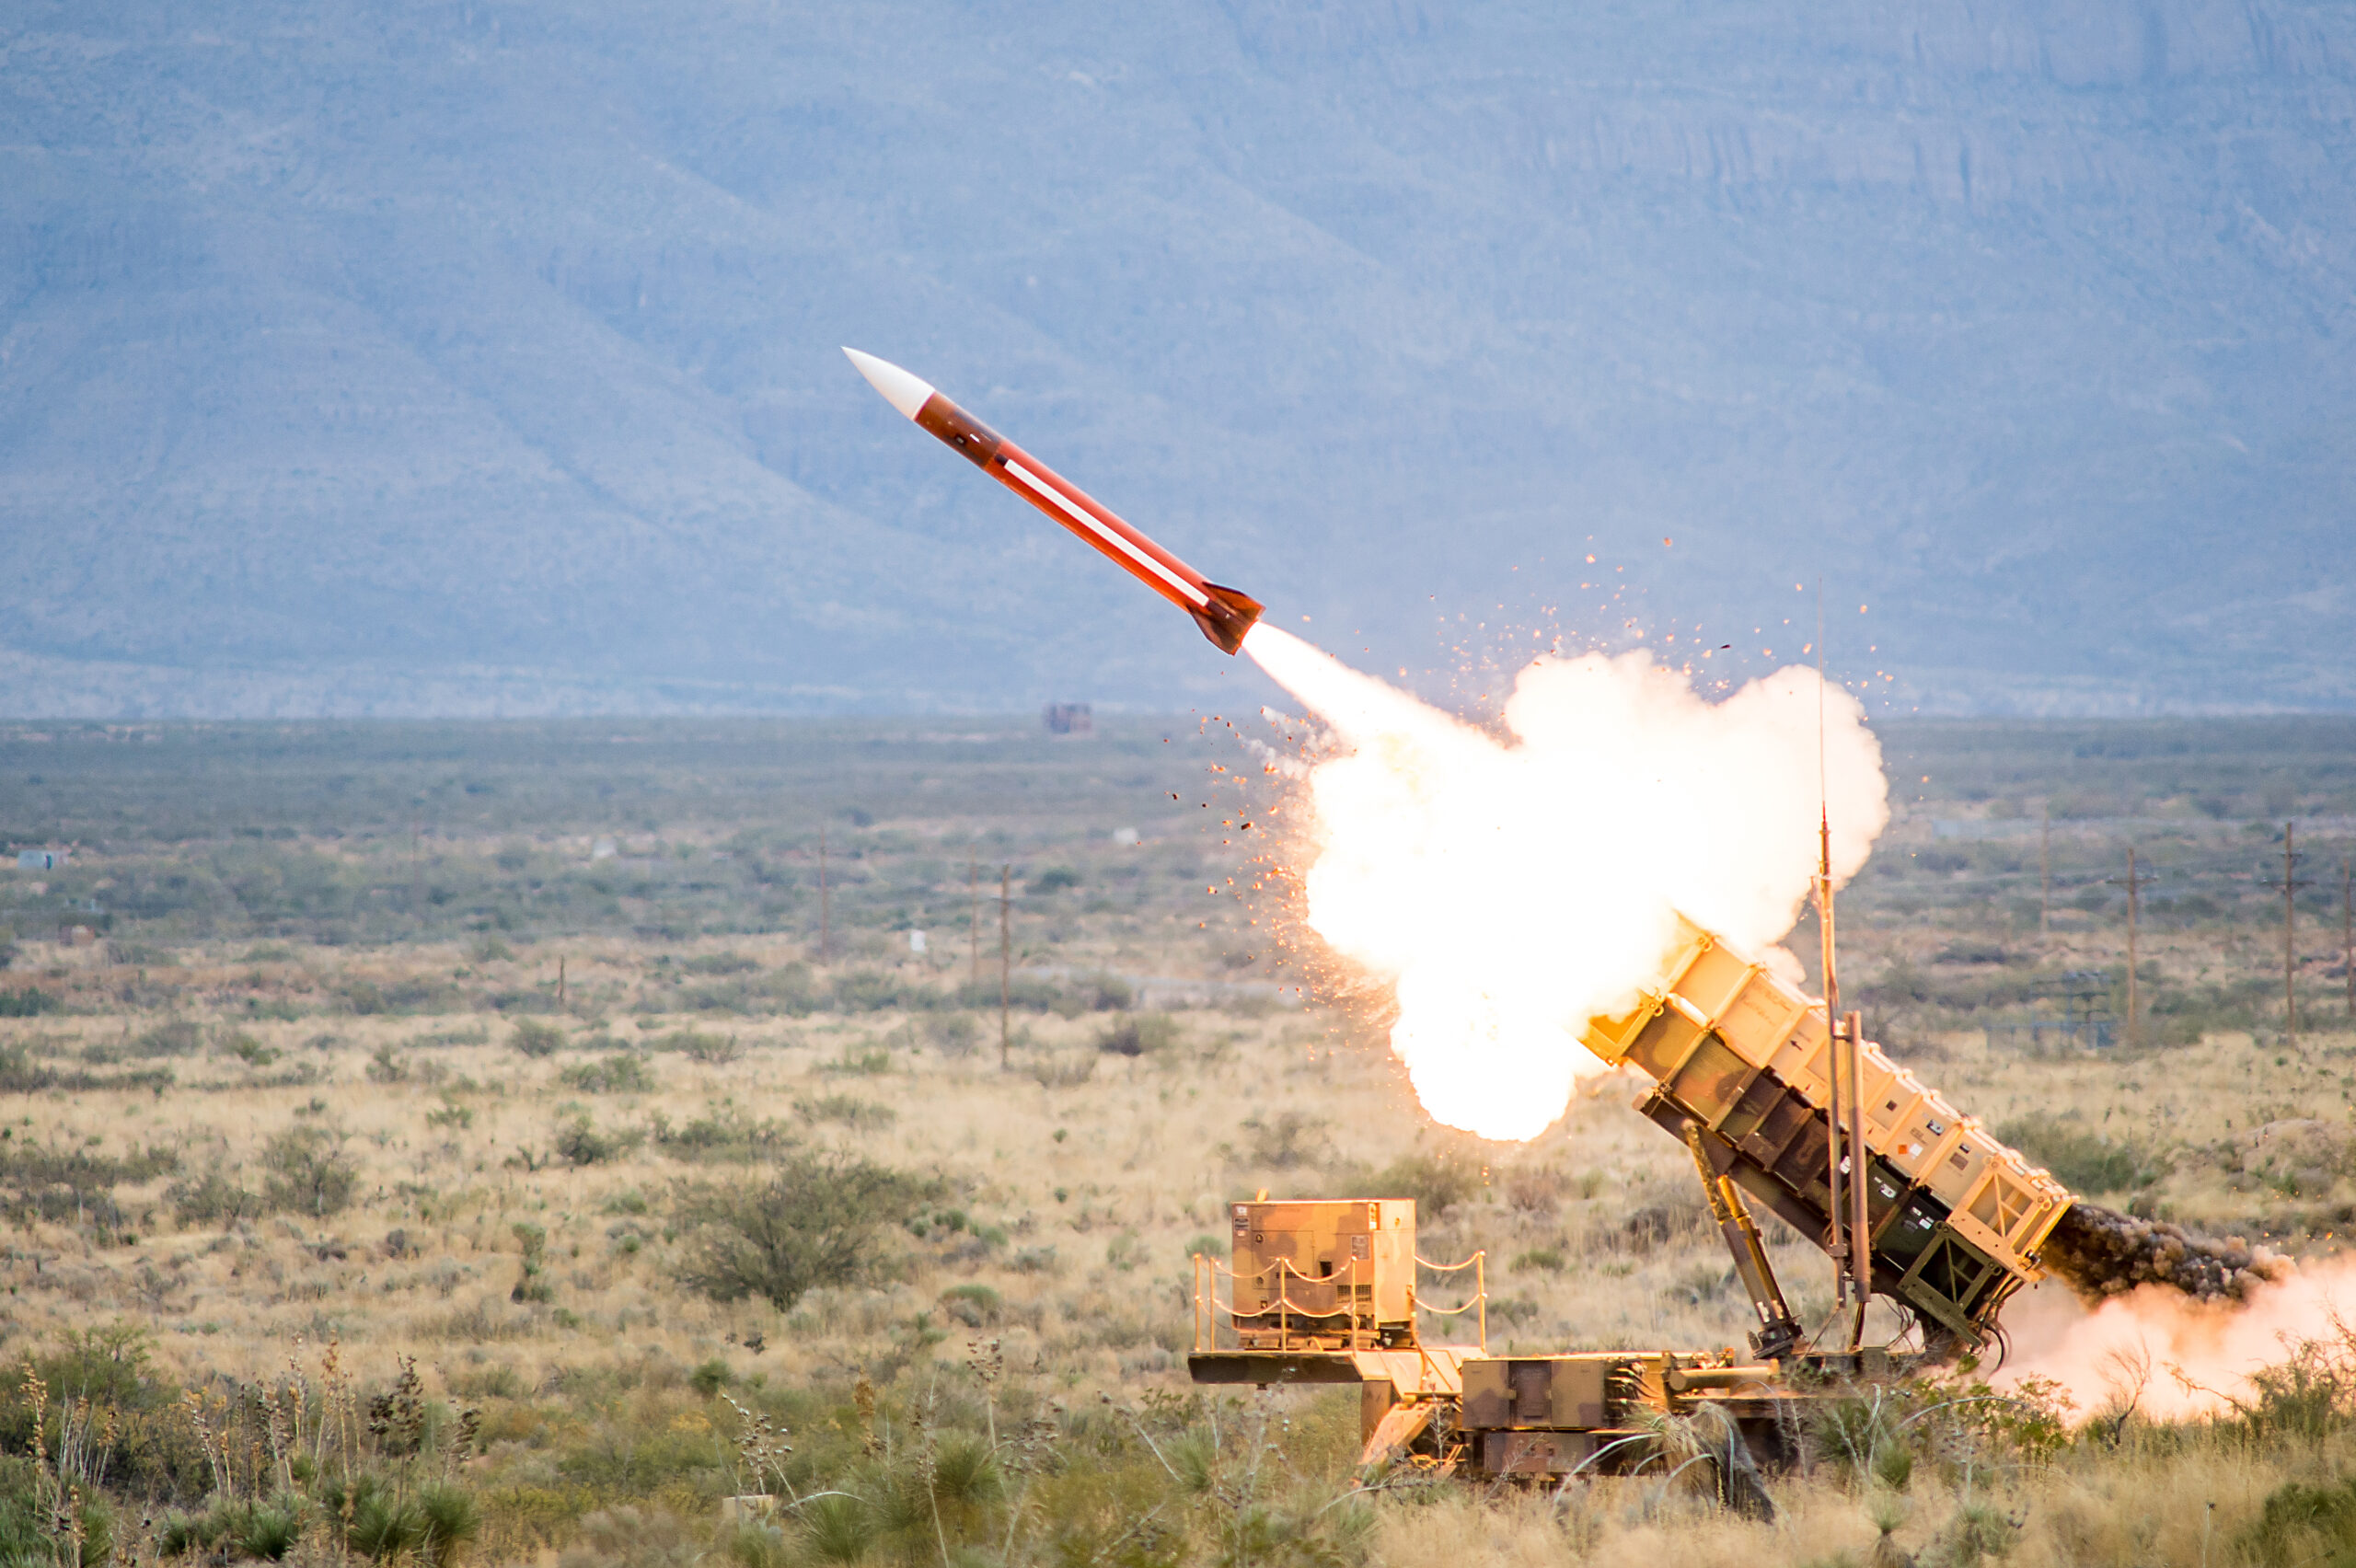 Live-Fire Tests In August For Army Air & Missile Defense